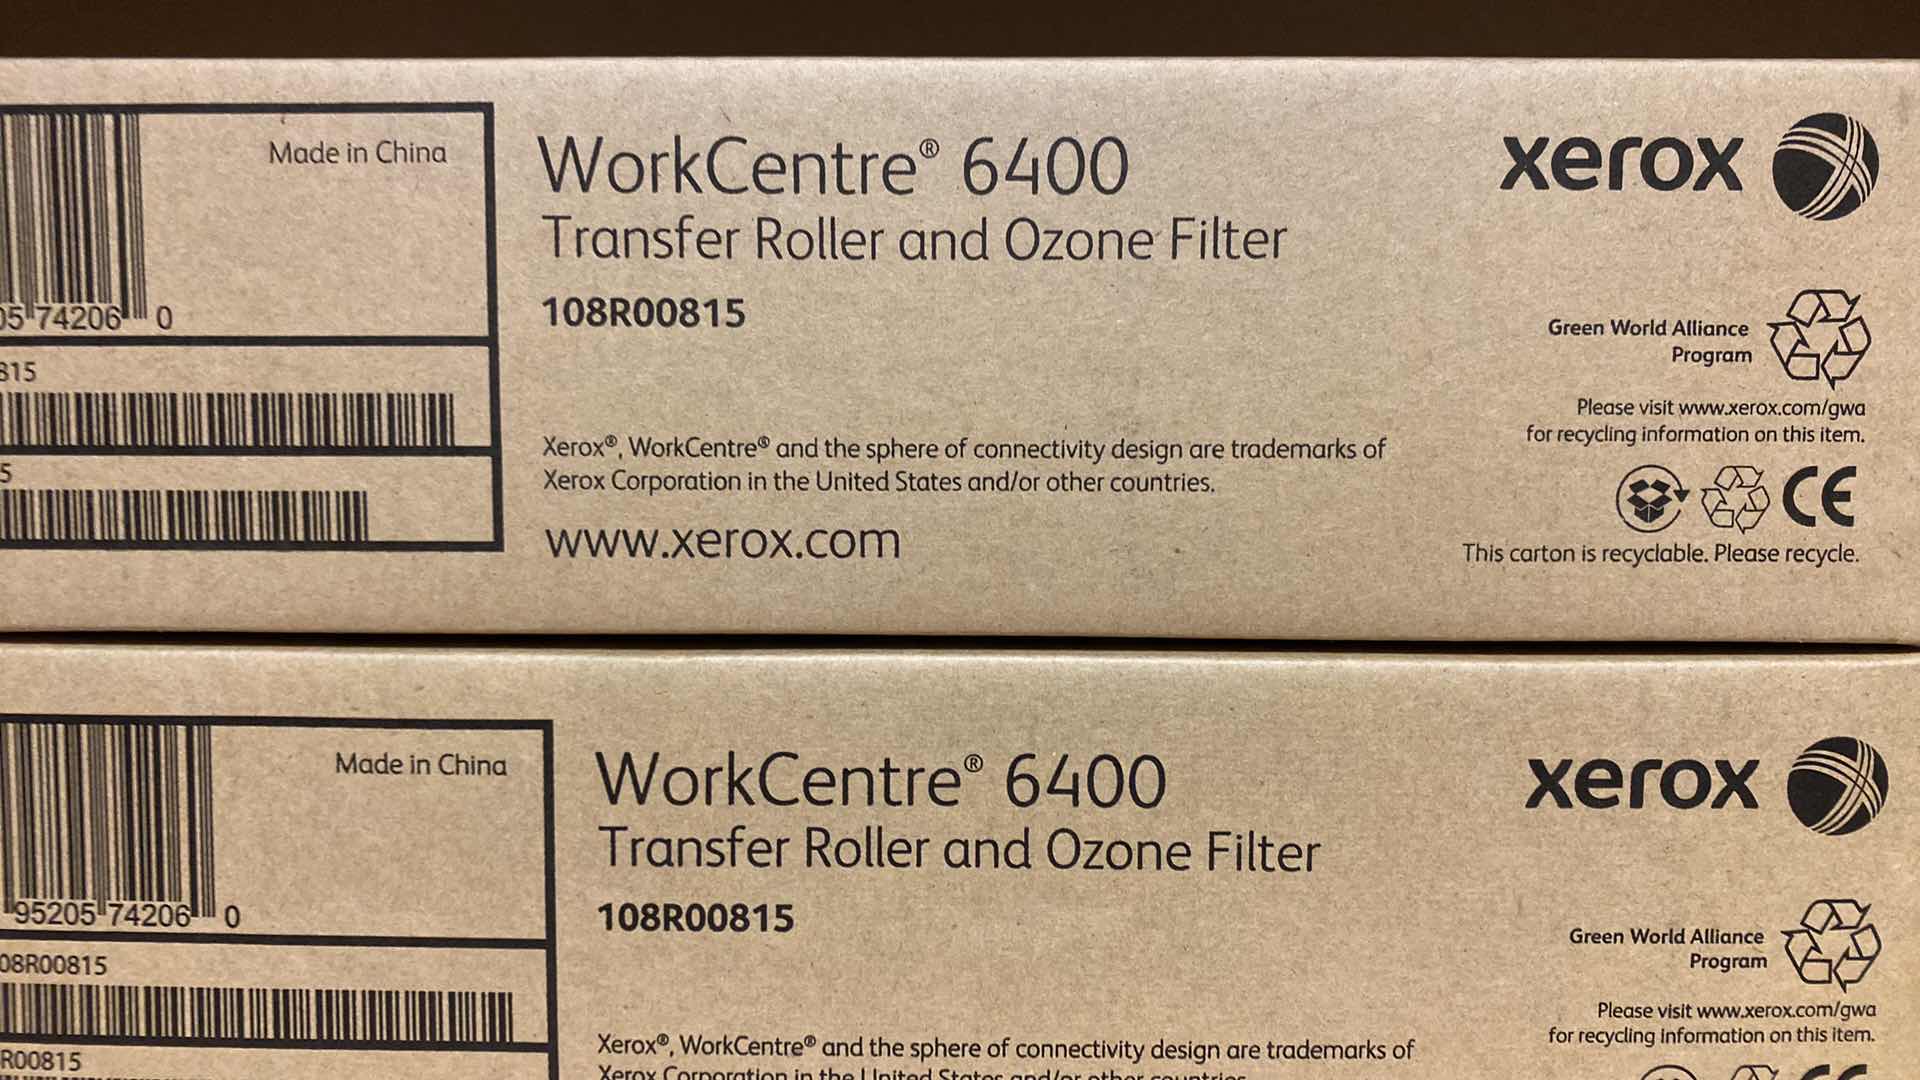 Photo 2 of NEW IN BOX 6-XEROX WORK CENTRE TRANSFER ROLLER AND OZONE FILTERS #108R00815